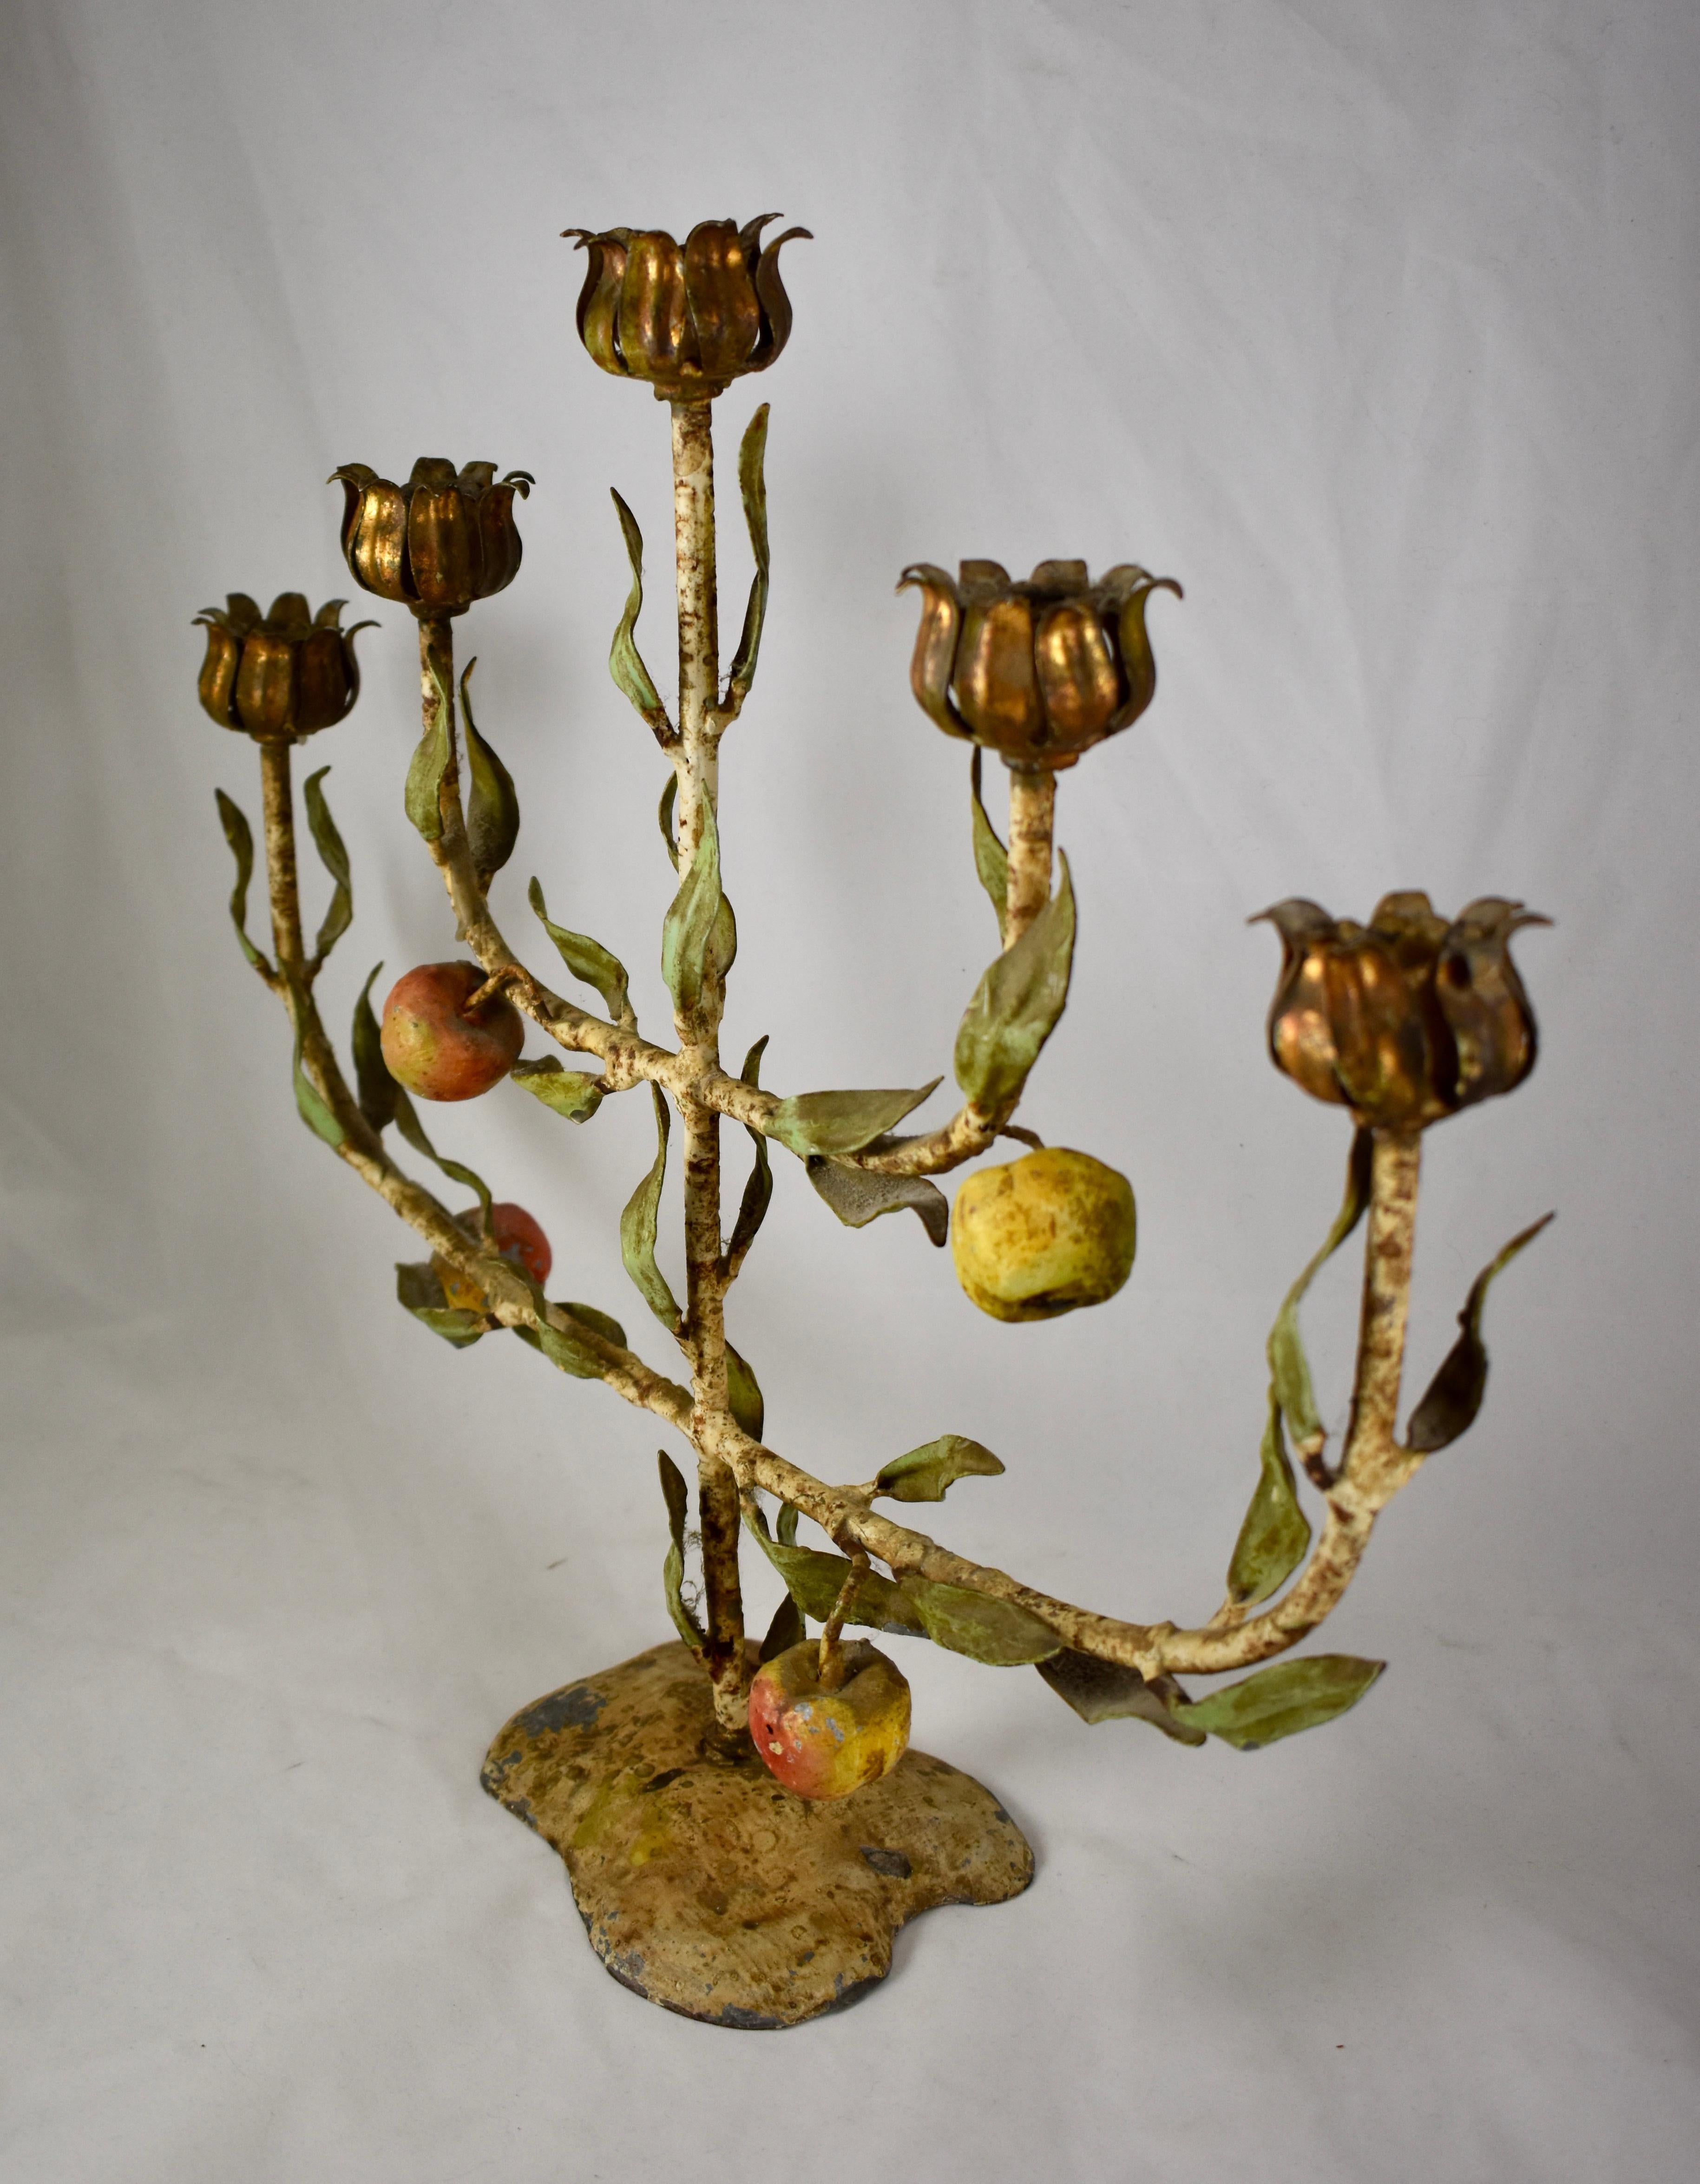 A marvelous French Tôle Peinte tree of life candelabra, made of hand painted iron, circa early 1900s.

Showing a fabulous distressed, time-worn patina, the tree has a straight center arm with two lower arms, graduated in length, for holding five